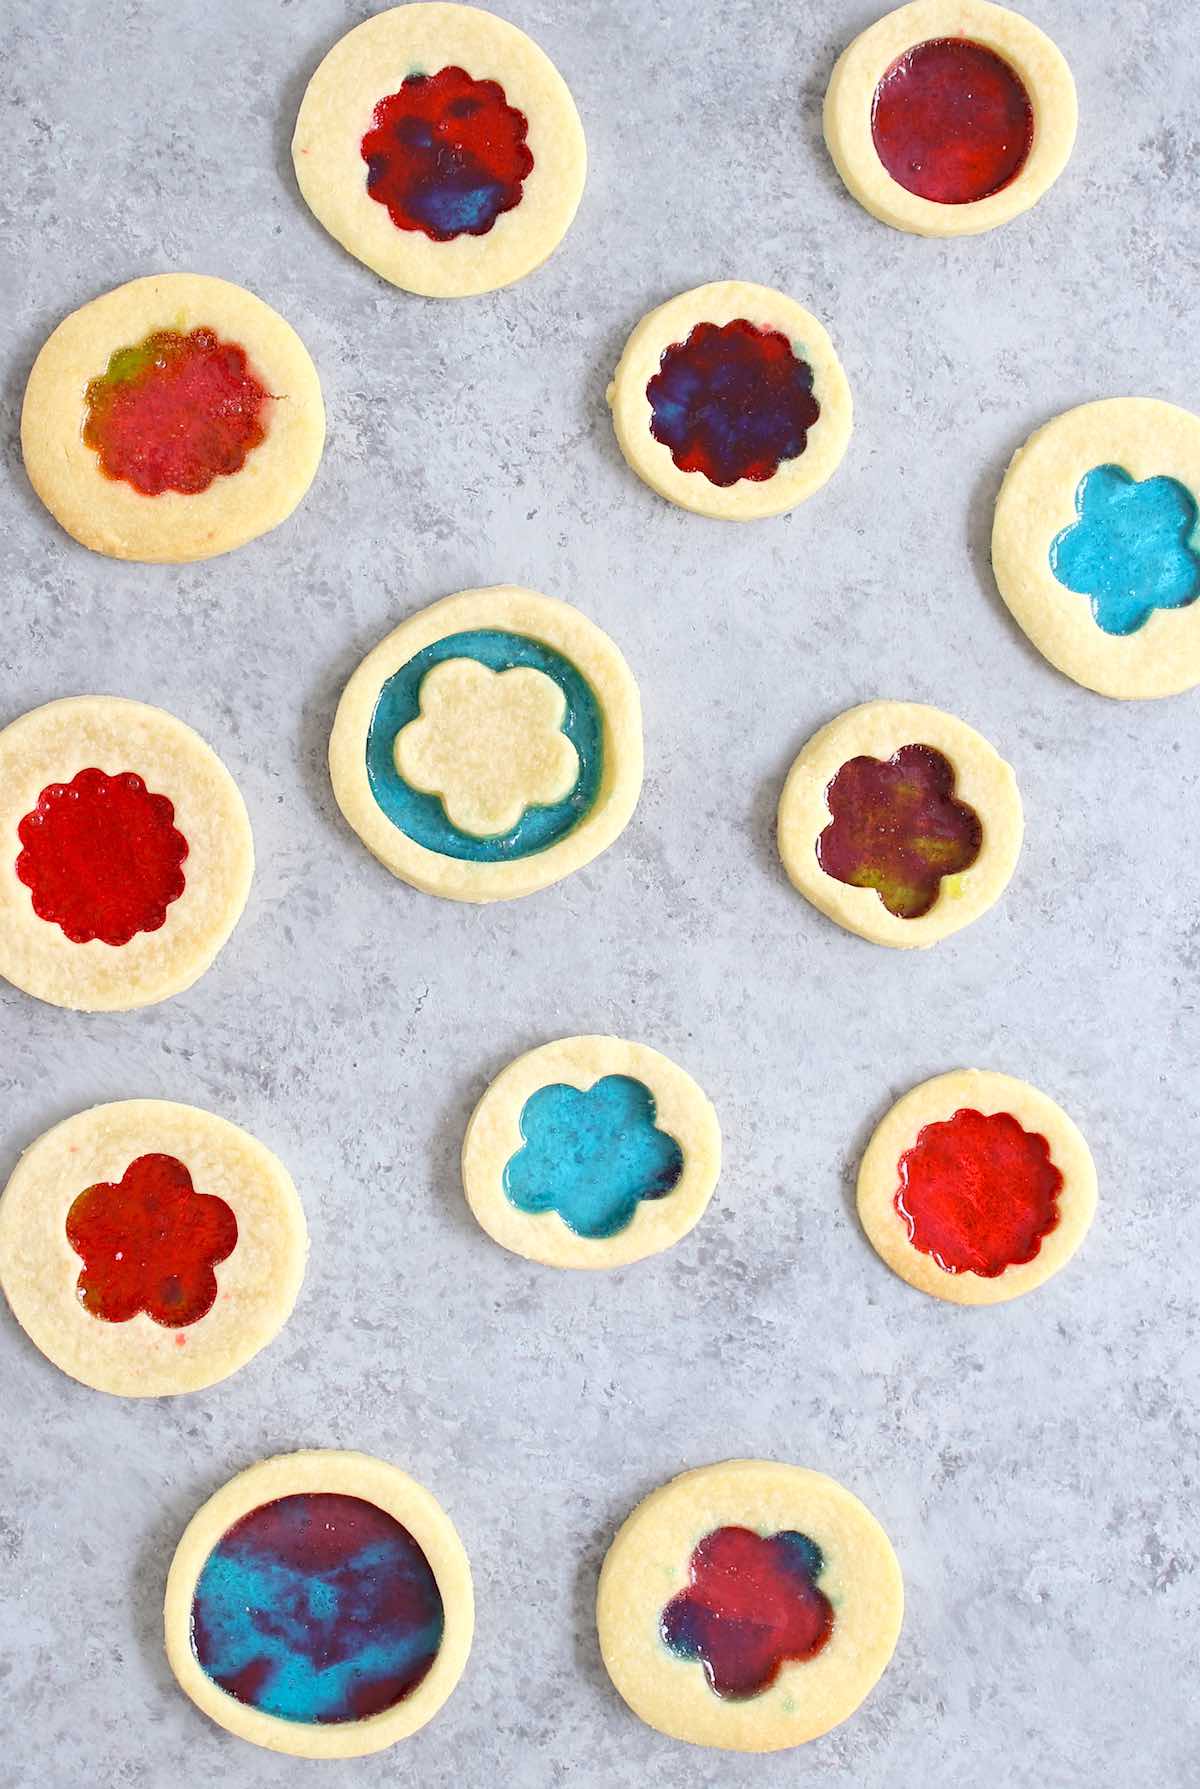 Display of stained glass cookies with different colors and shapes.